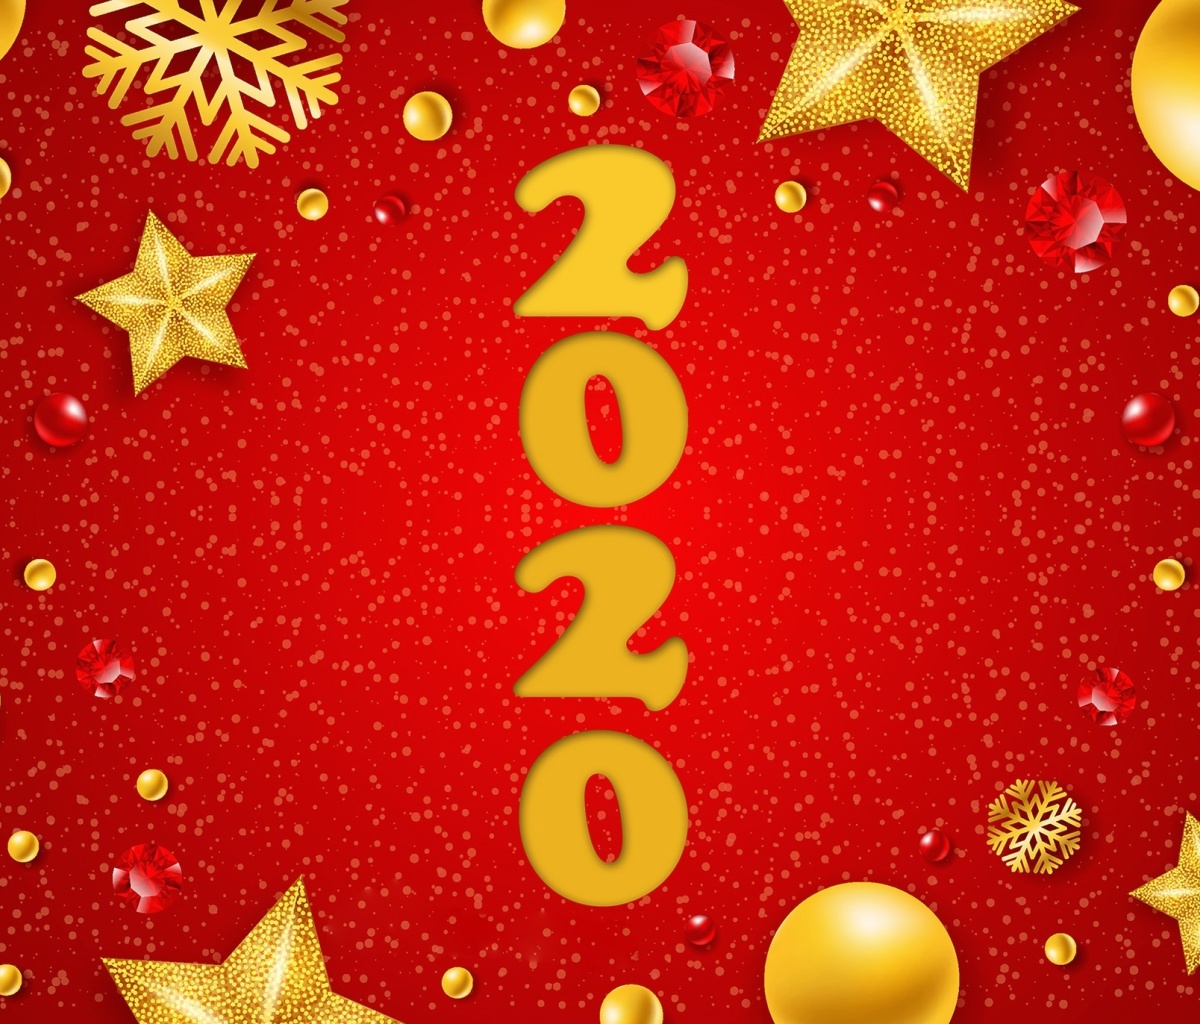 Happy New Year 2020 Messages screenshot #1 1200x1024